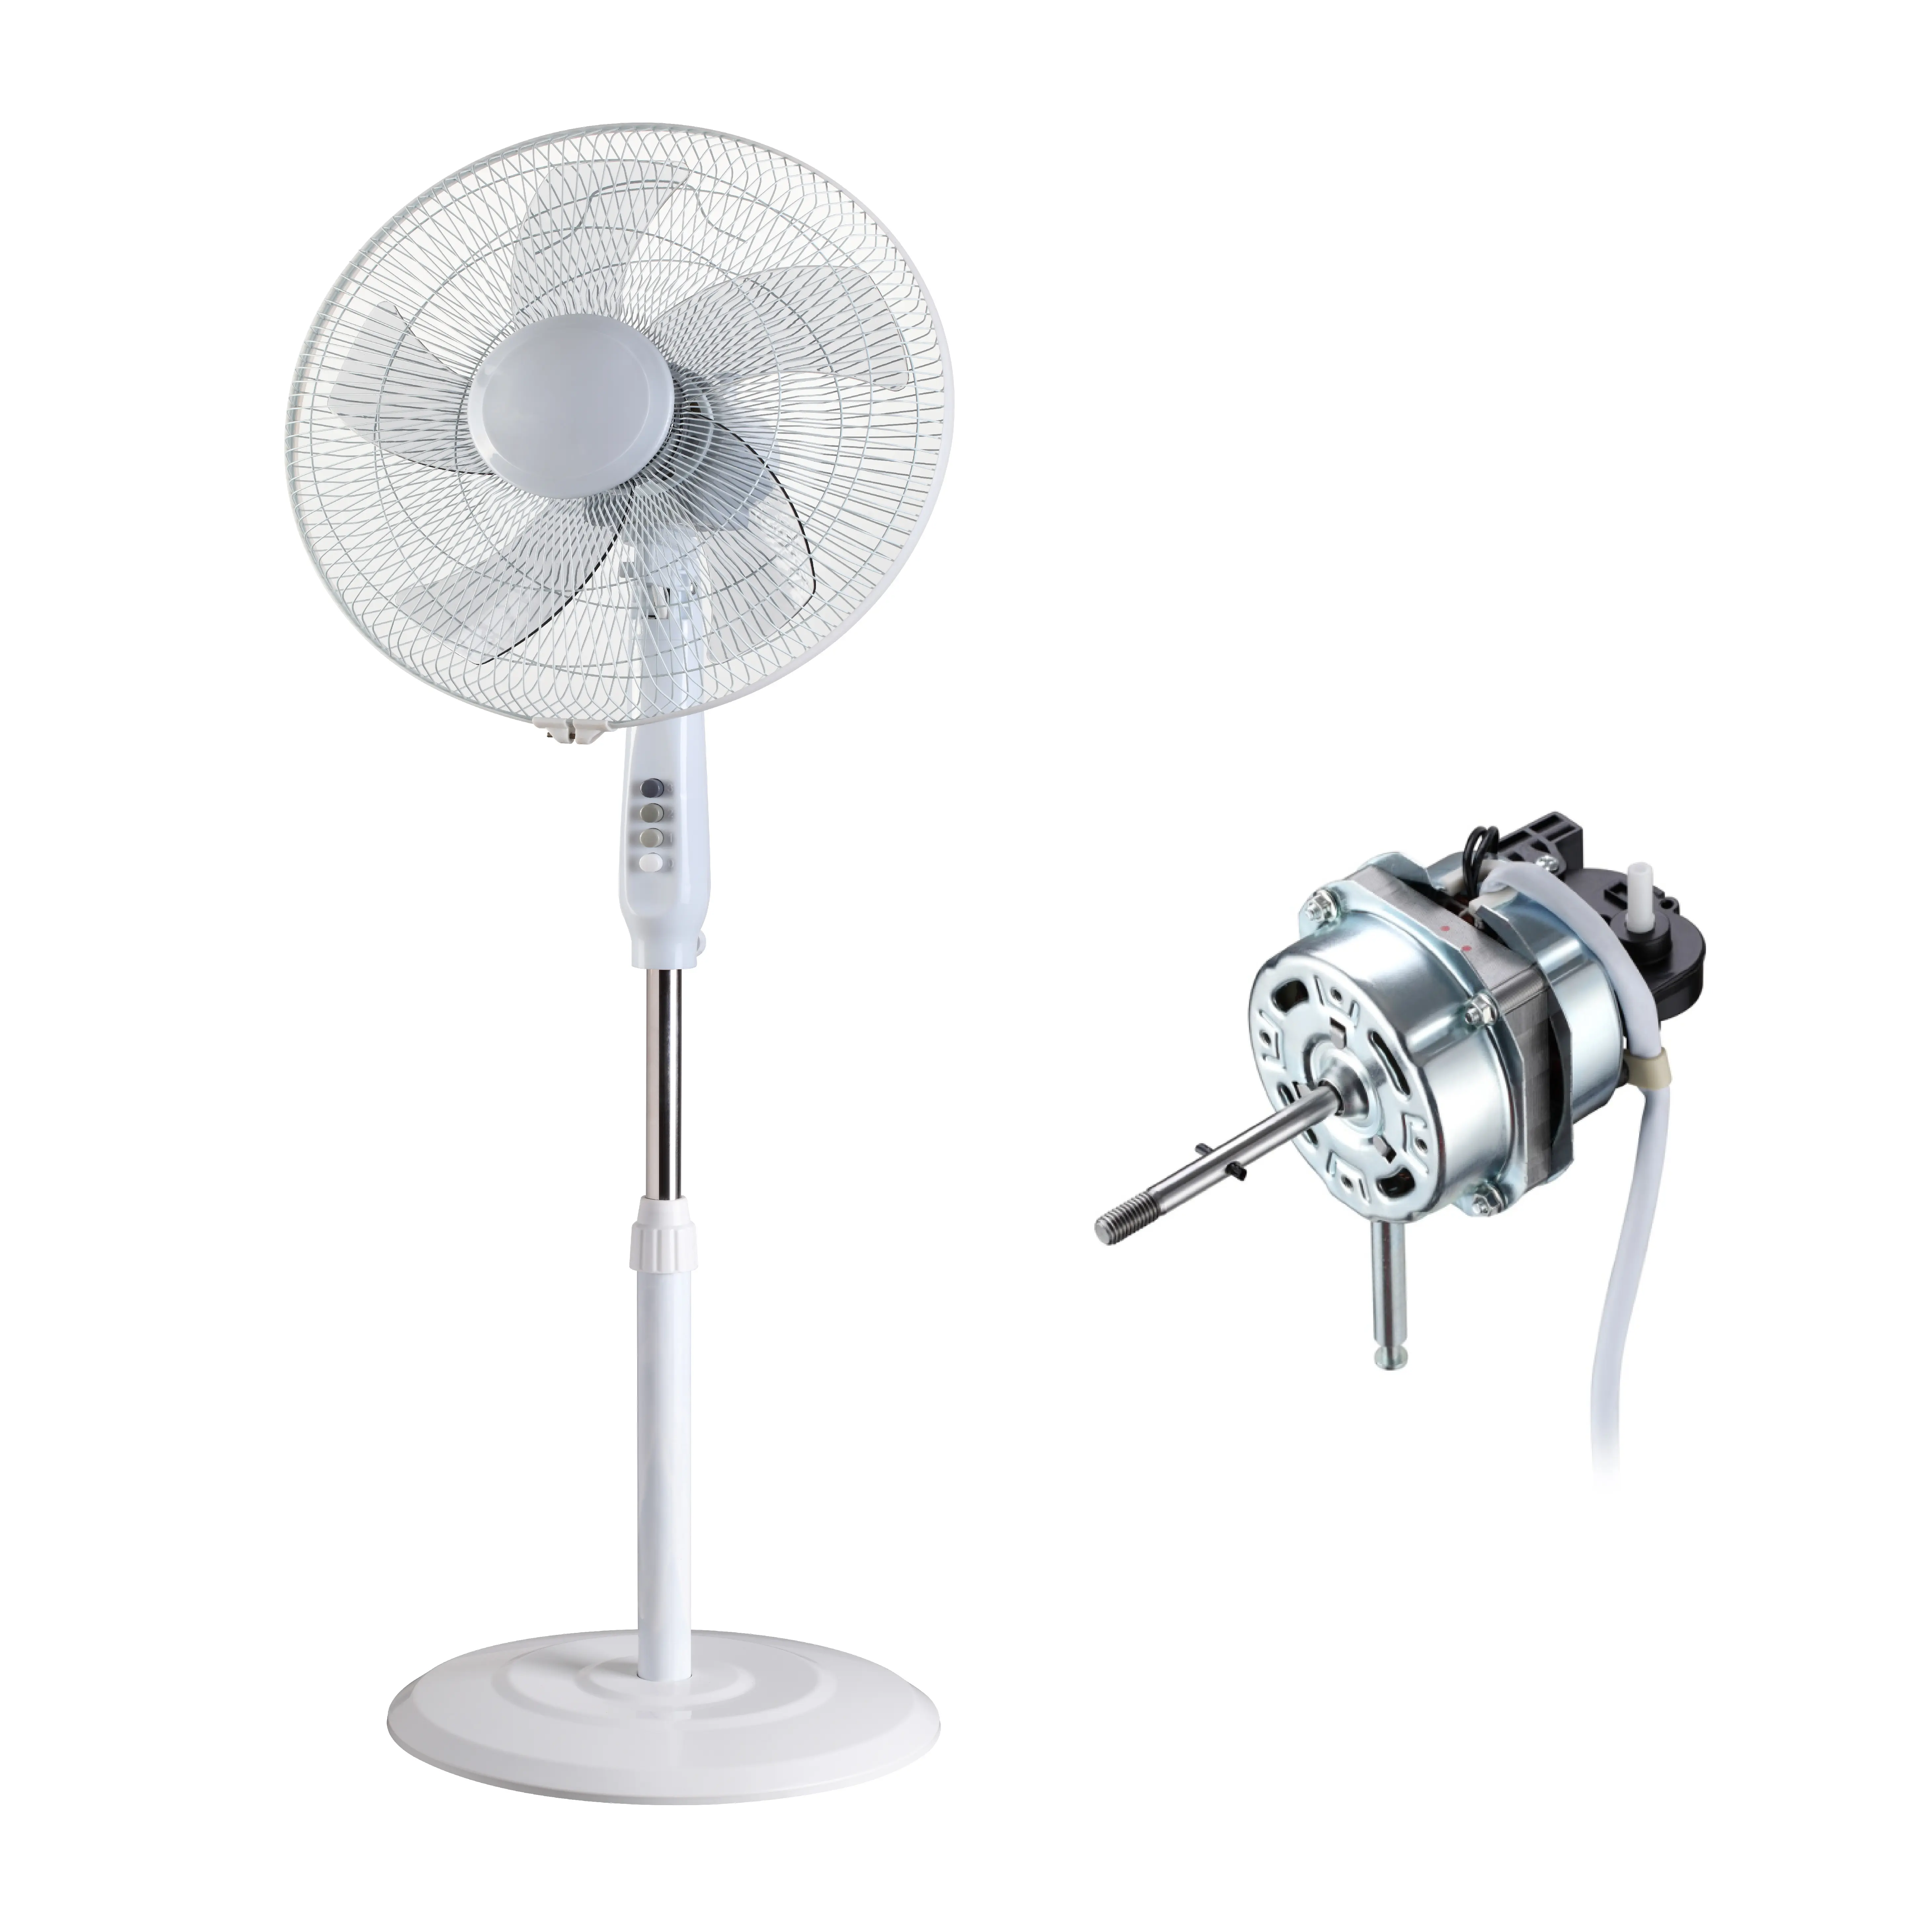 Floor standing household oscillating 3 speed electric stand fan